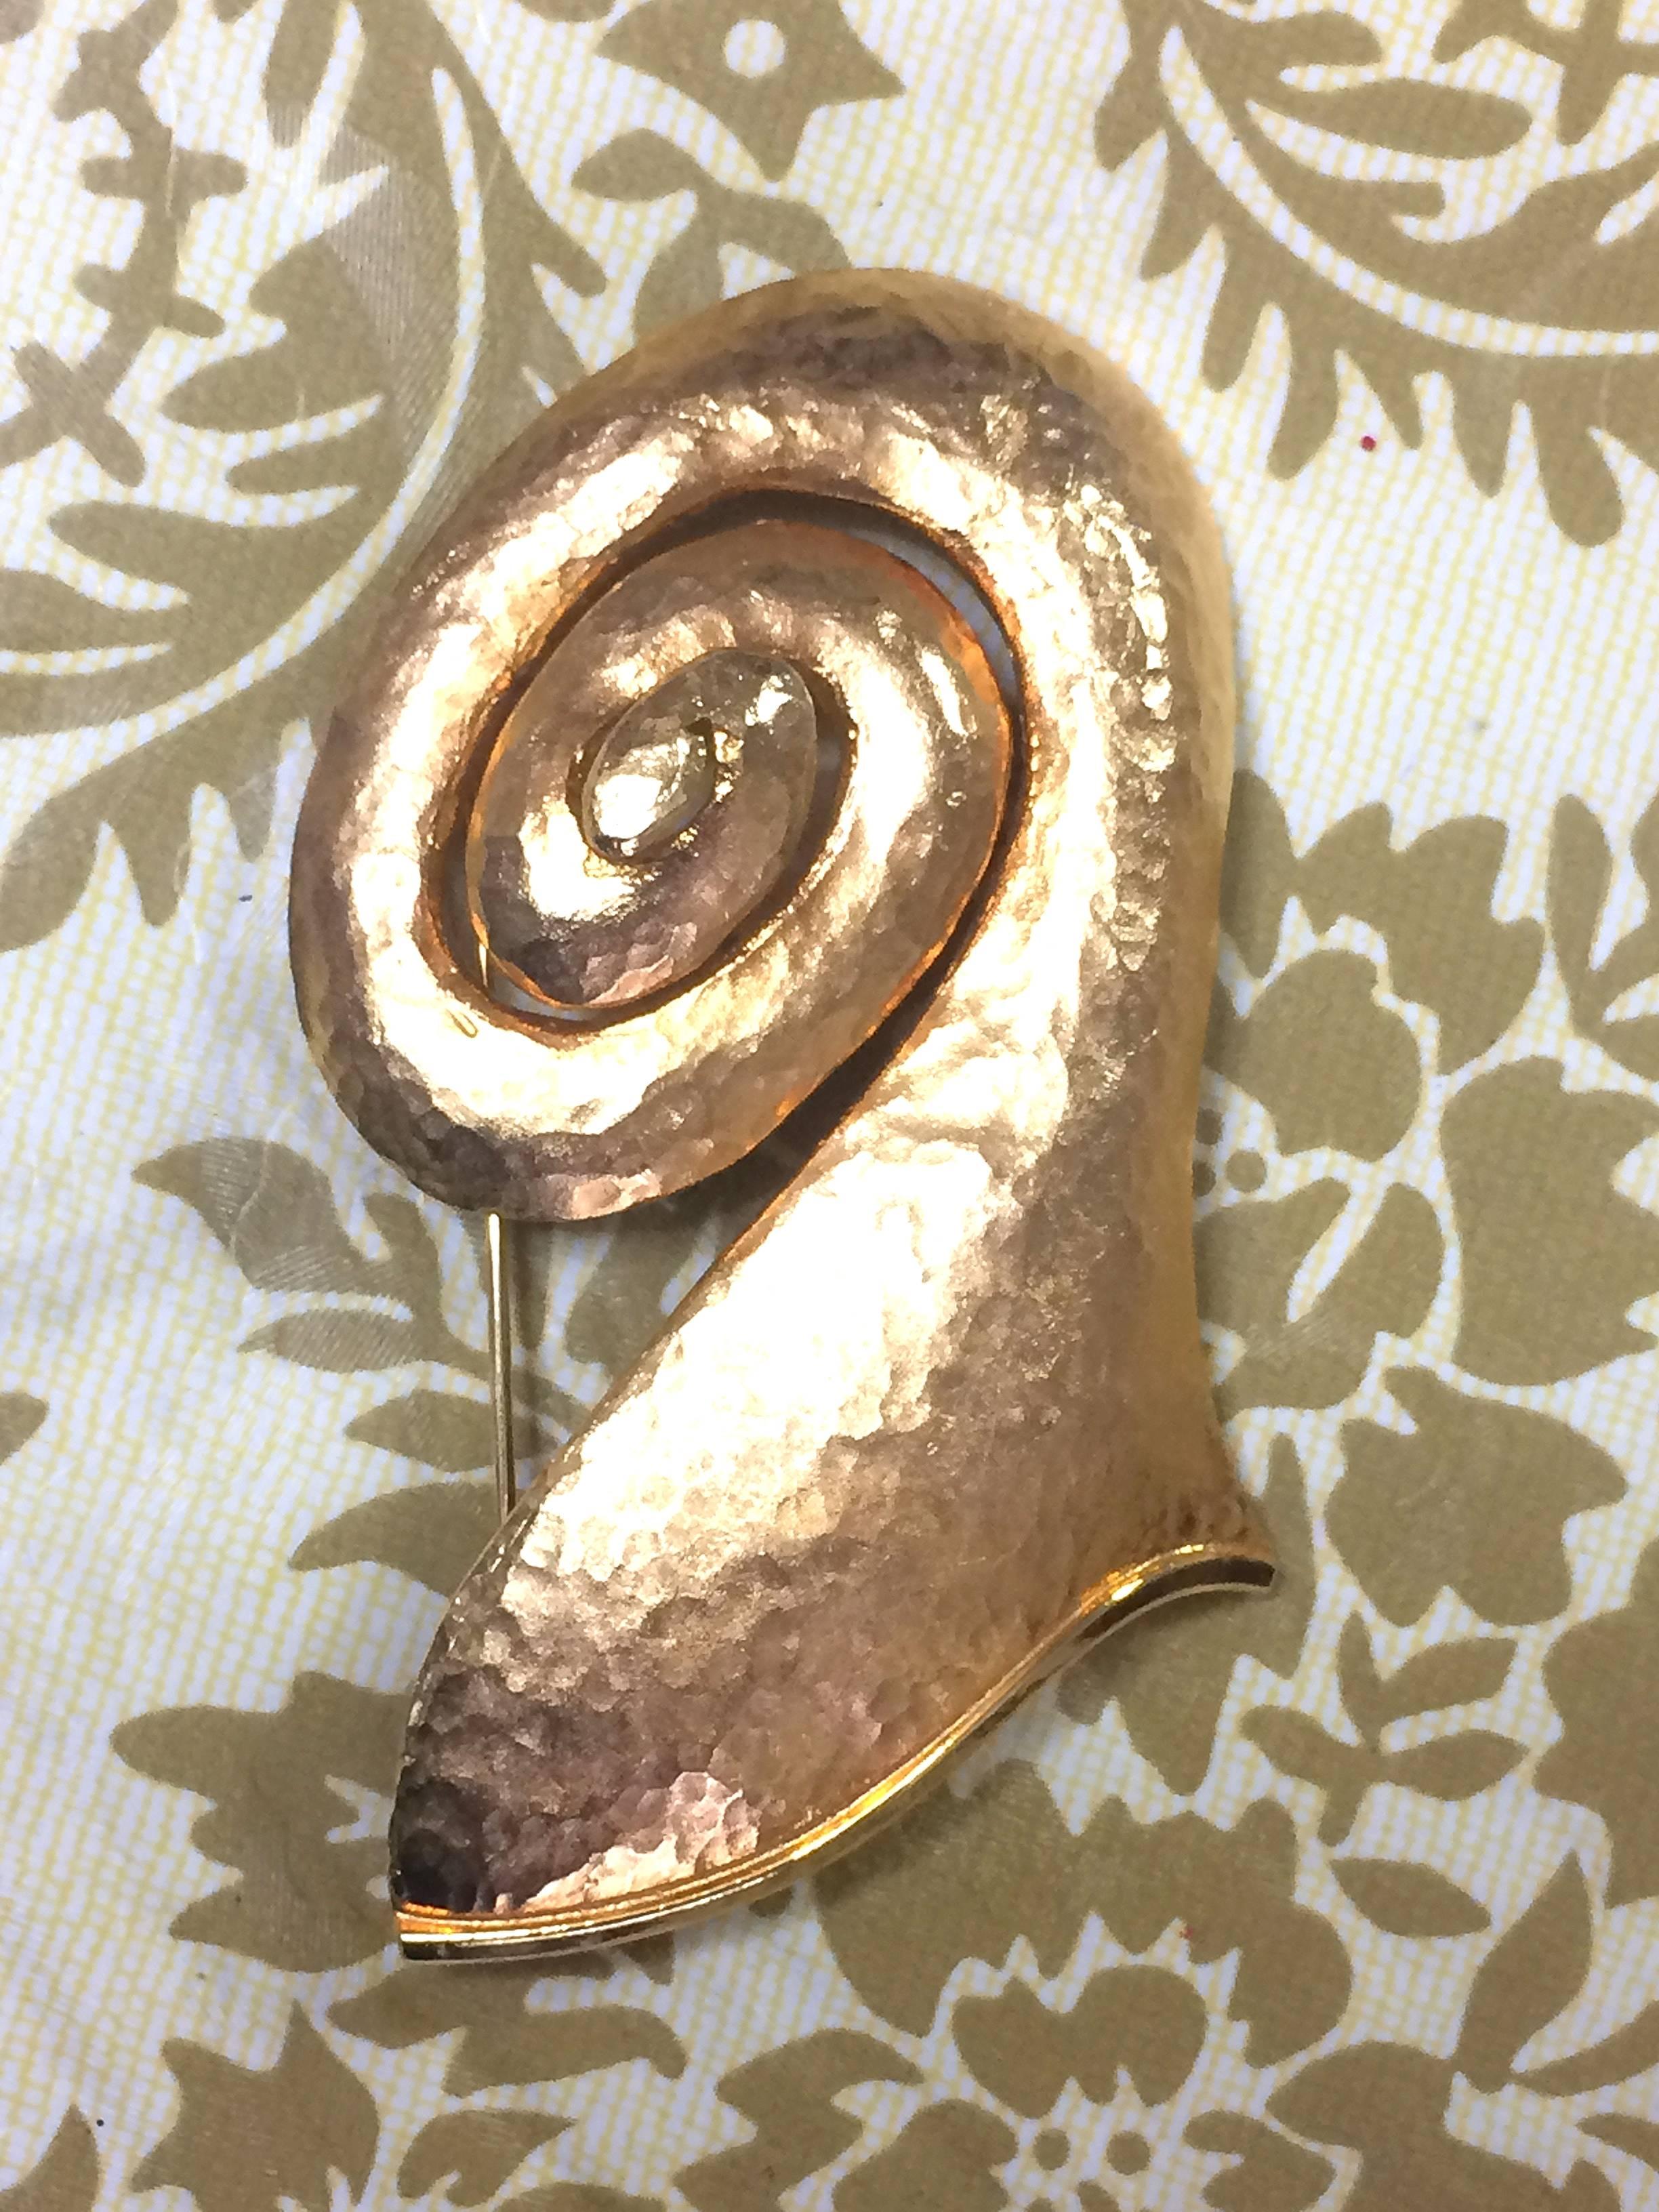 1990s. Vintage Christian Lacroix golden large snail design brooch, can be hat pin, scarf pin. Perfect gift jewelry.

Fun, Chic and Gorgeous jewelry piece, a snail design brooch from Christian Lacroix back in the 90's! 
Great gift idea. Free gift